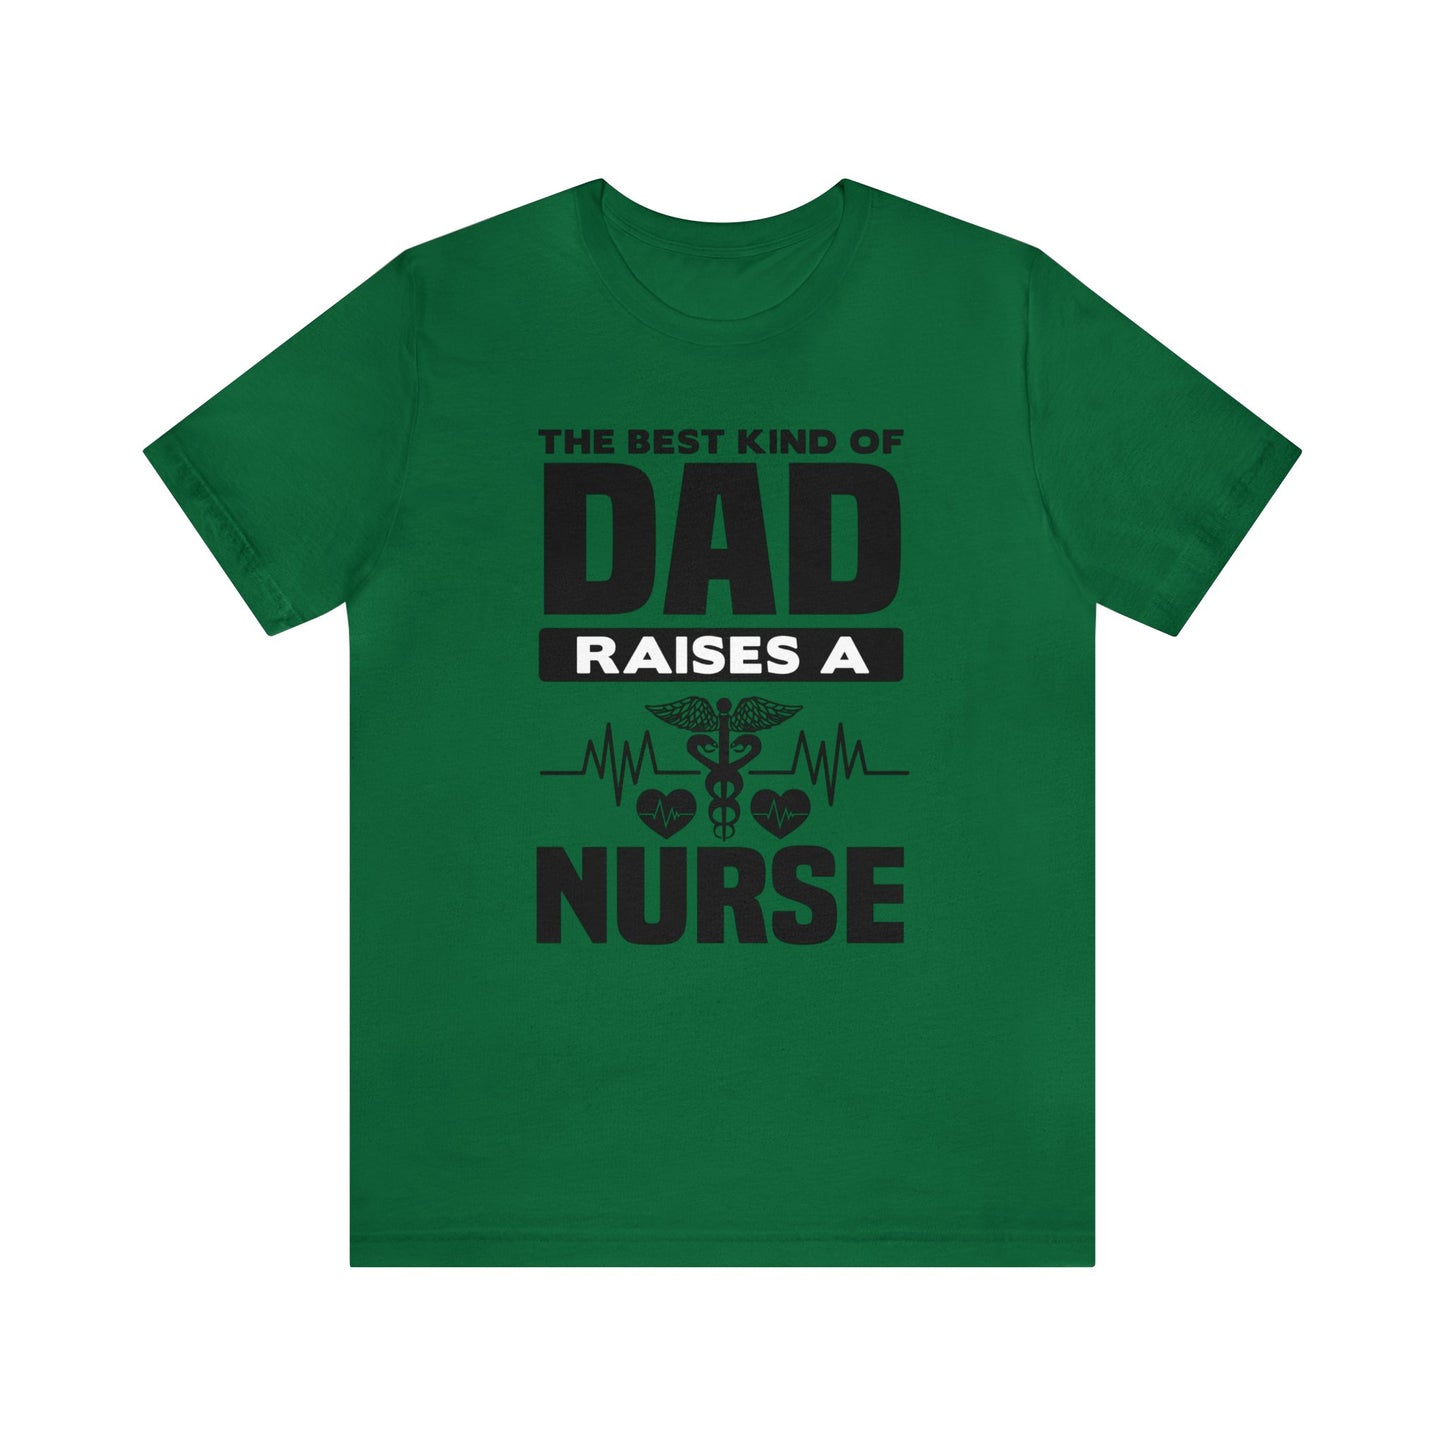 Best Kind of Dad Raised Nurse T-Shirt - Perfect Appreciation Tee for Healthcare Dads!